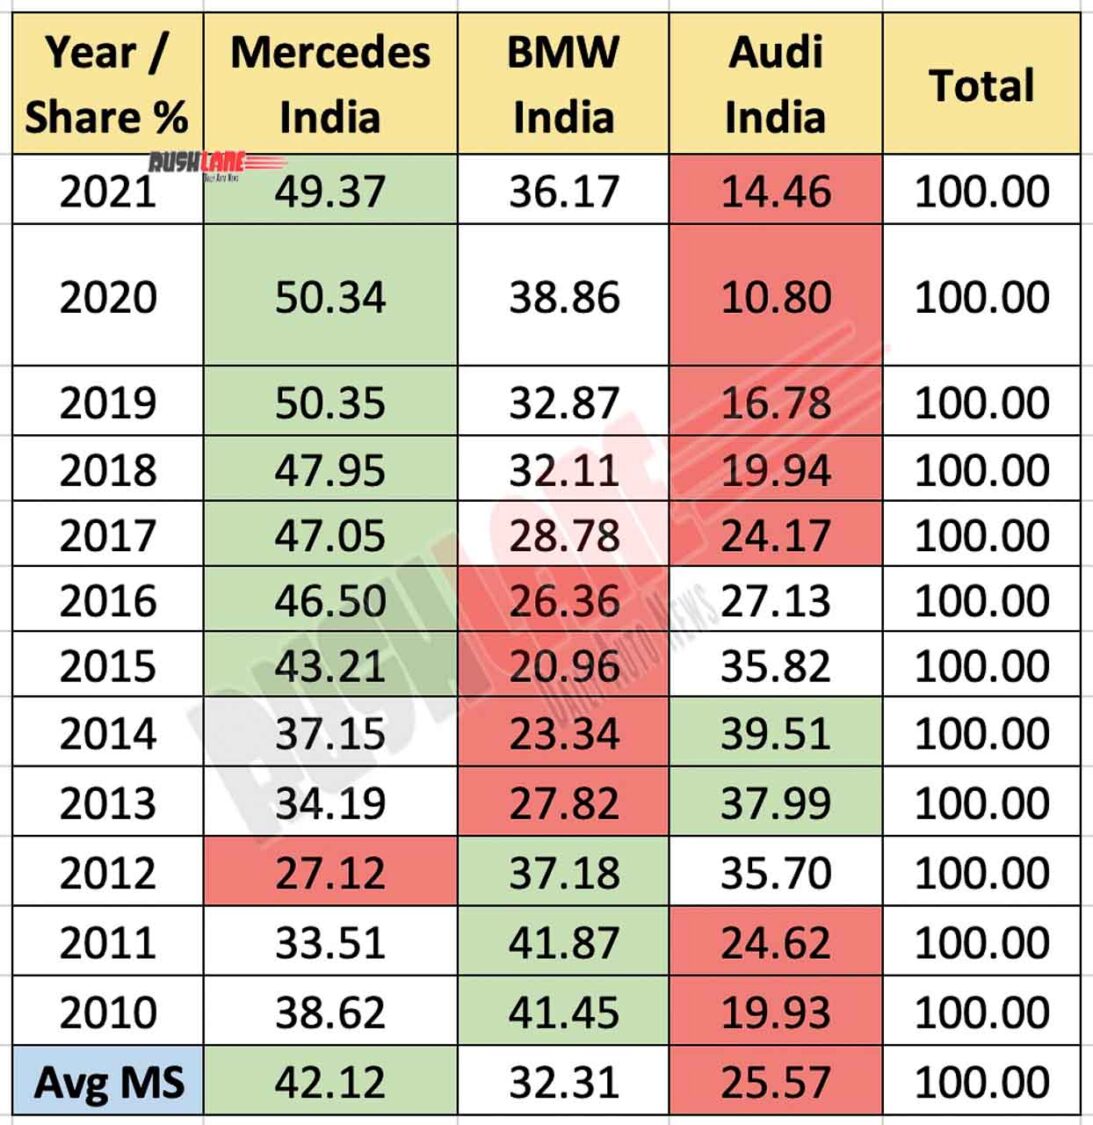 Market share comparison of top 3 luxury car brands in India - Mercedes, BMW, Audi